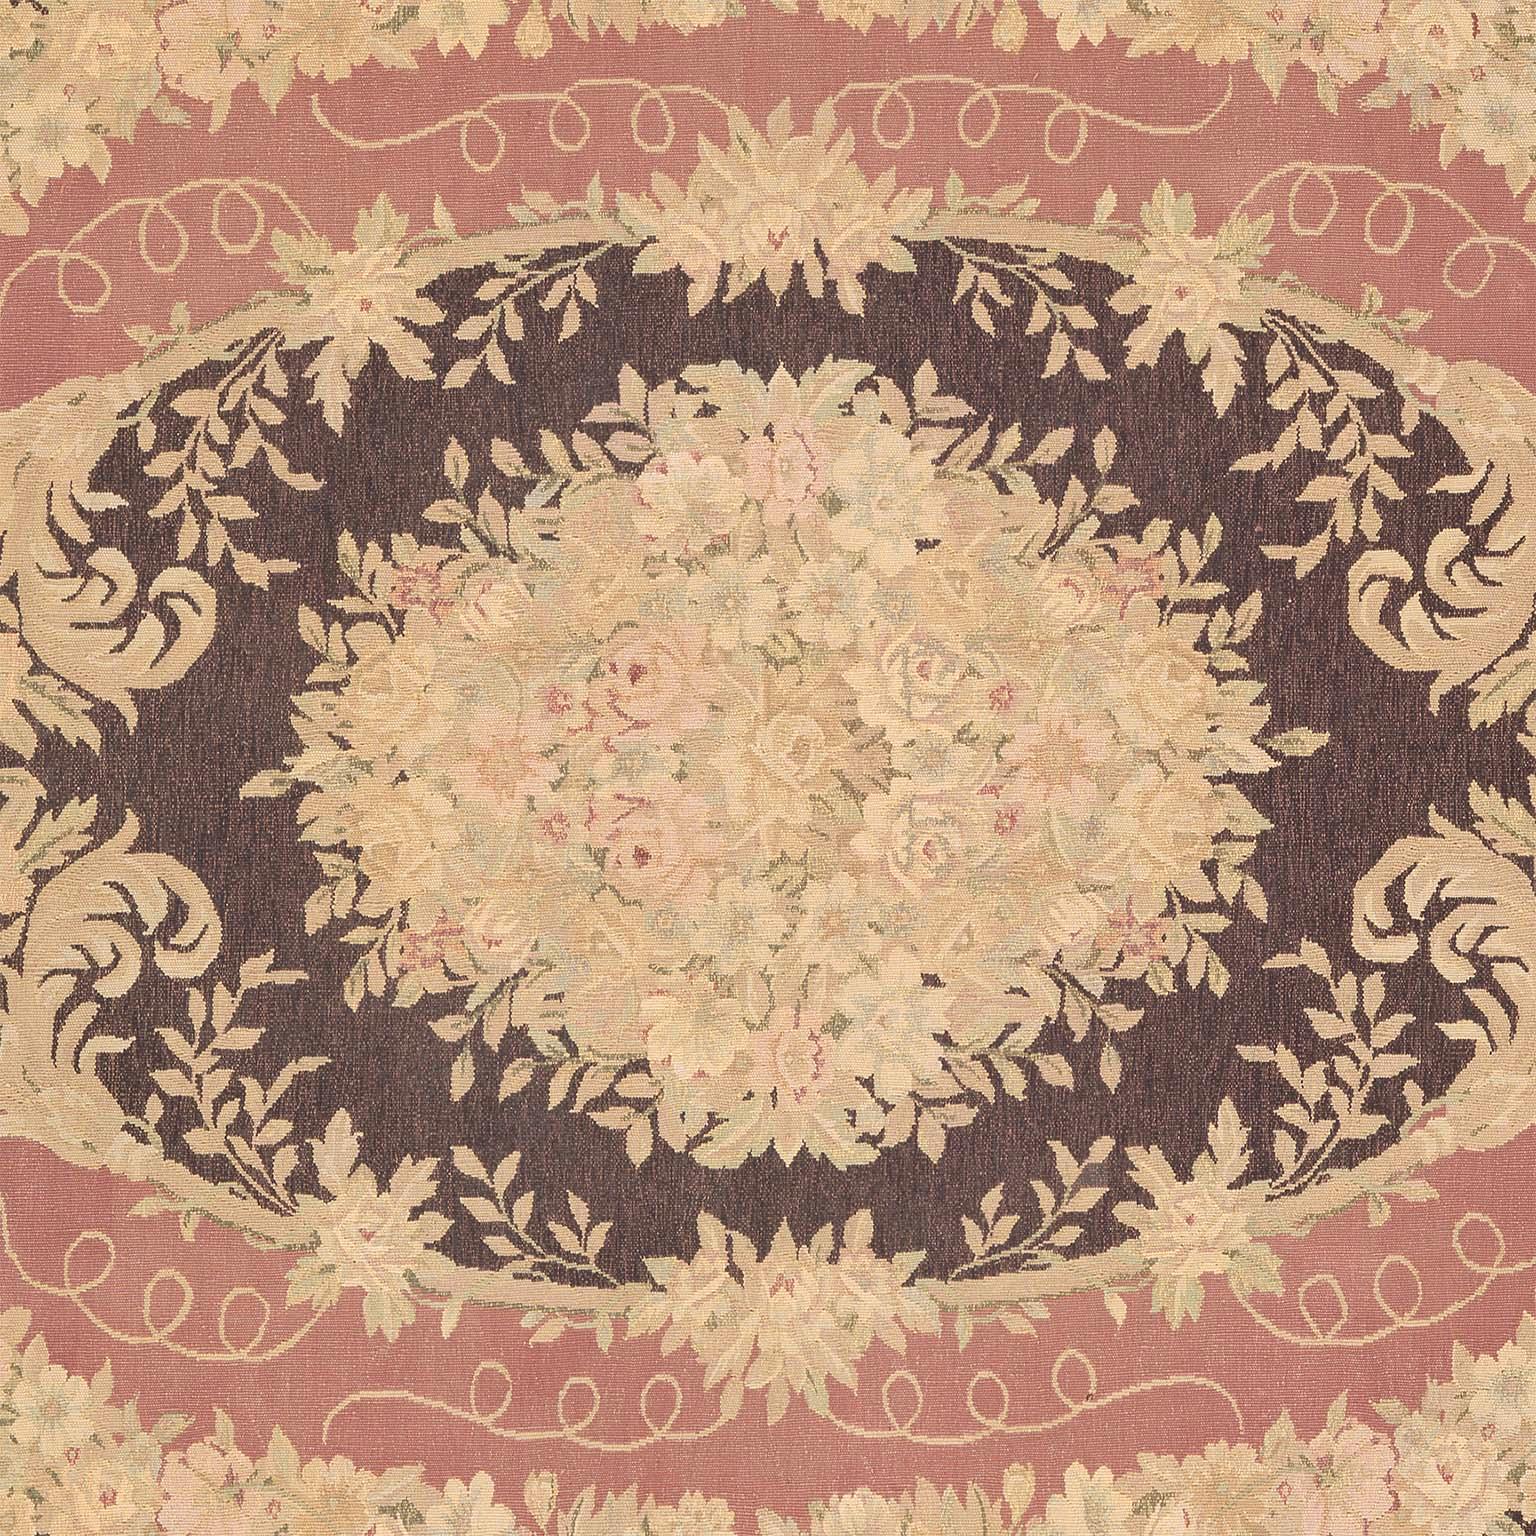 Early-20th Century, French, Aubusson Rug For Sale 2